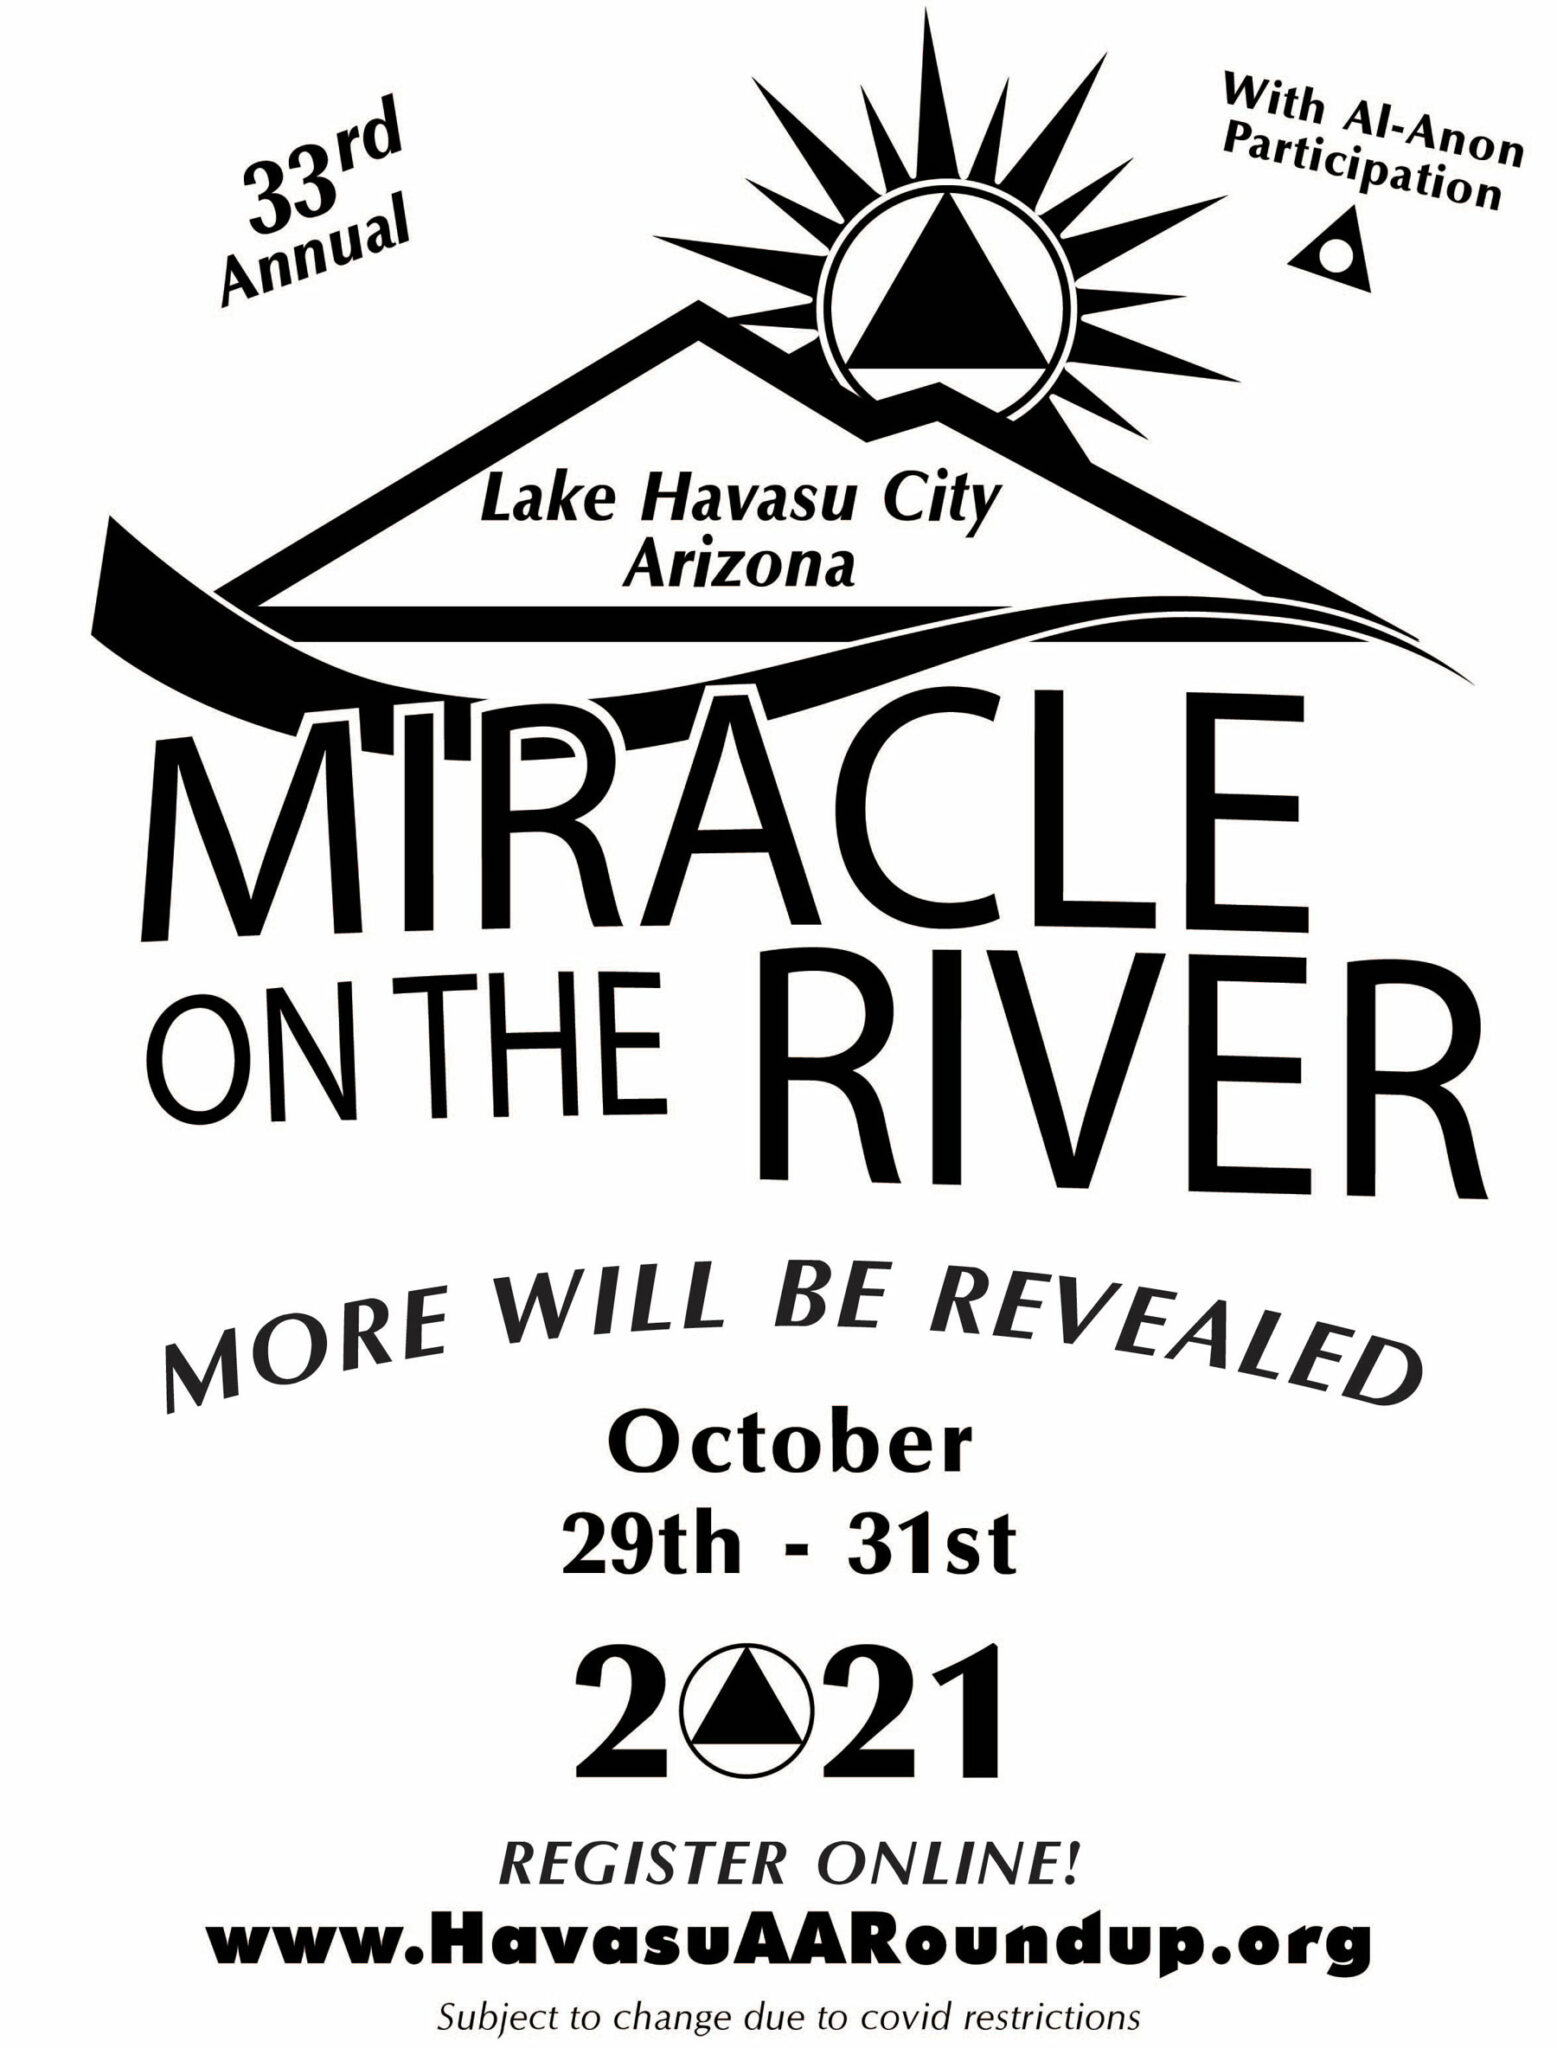 Miracle on the River Mendocino Coast Alcoholics Anonymous